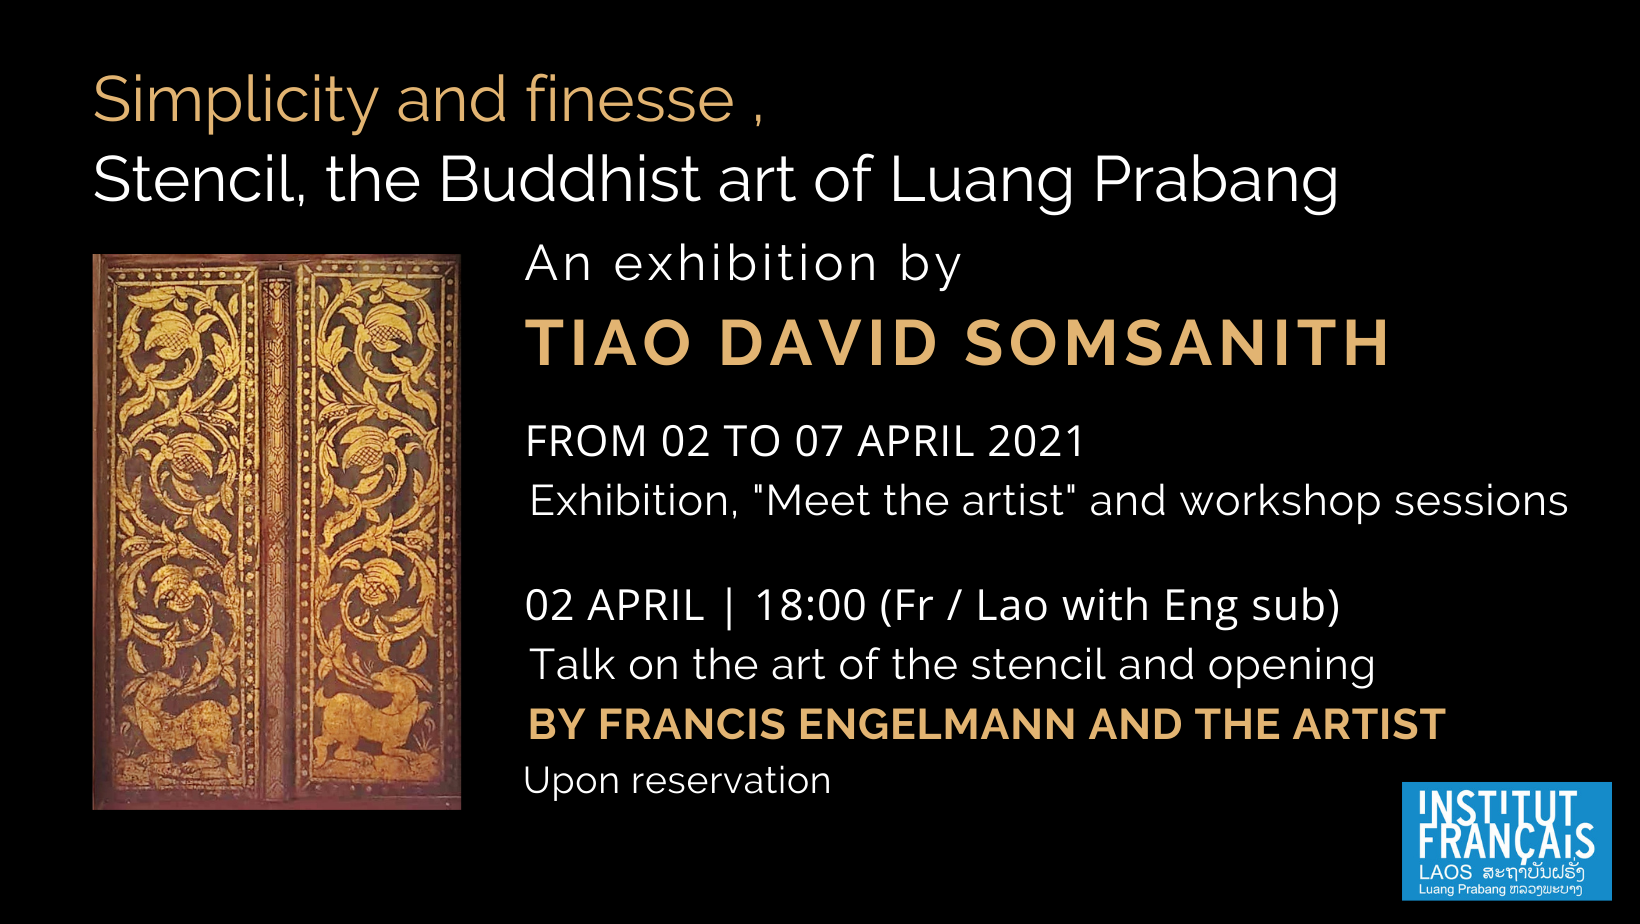 Exhibitions “Simplicity and refinement. The stencil, Buddhist art of Luang Prabang”